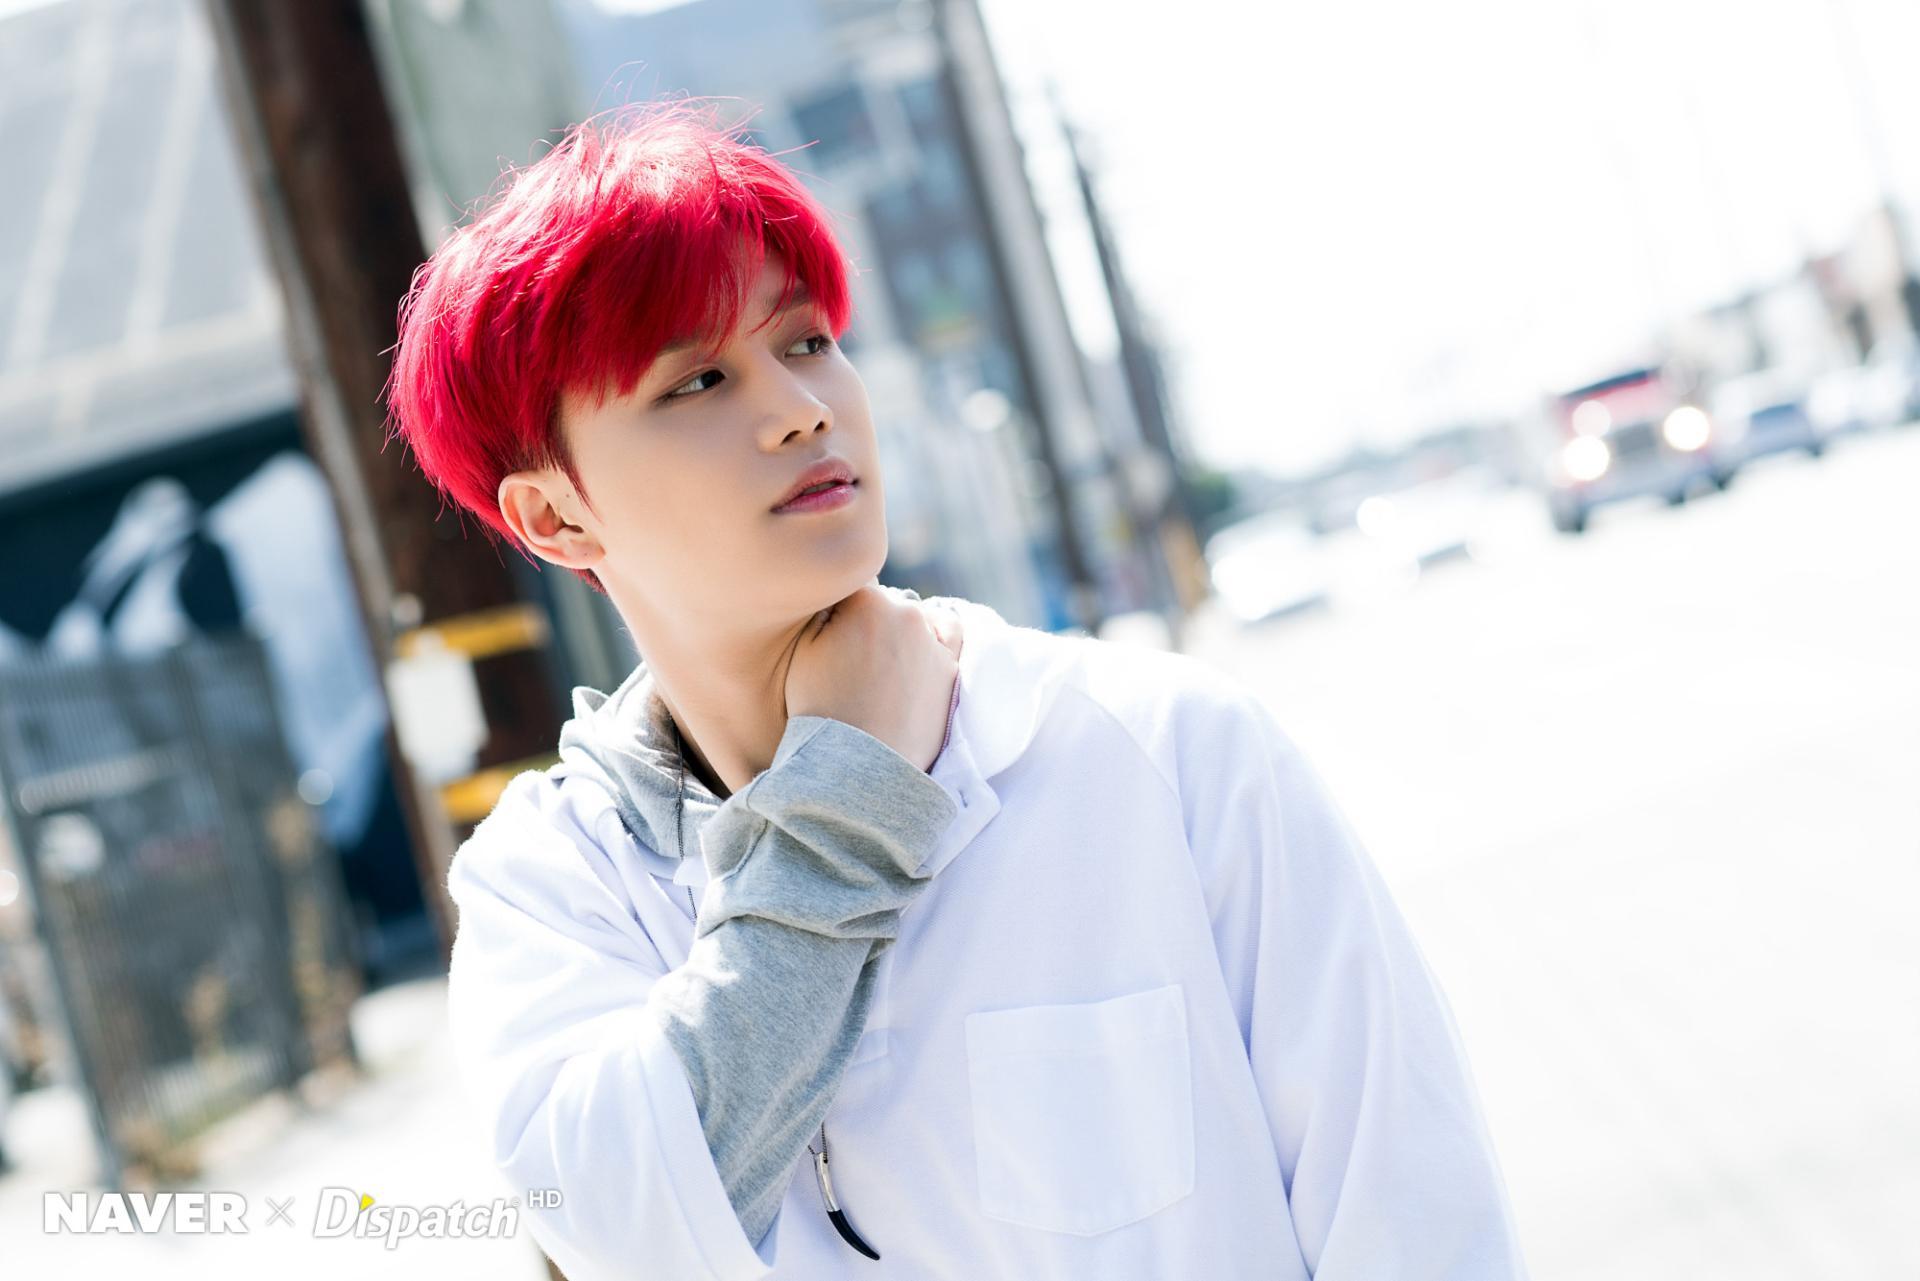 NCT U image Taeil HD wallpaper and background photo